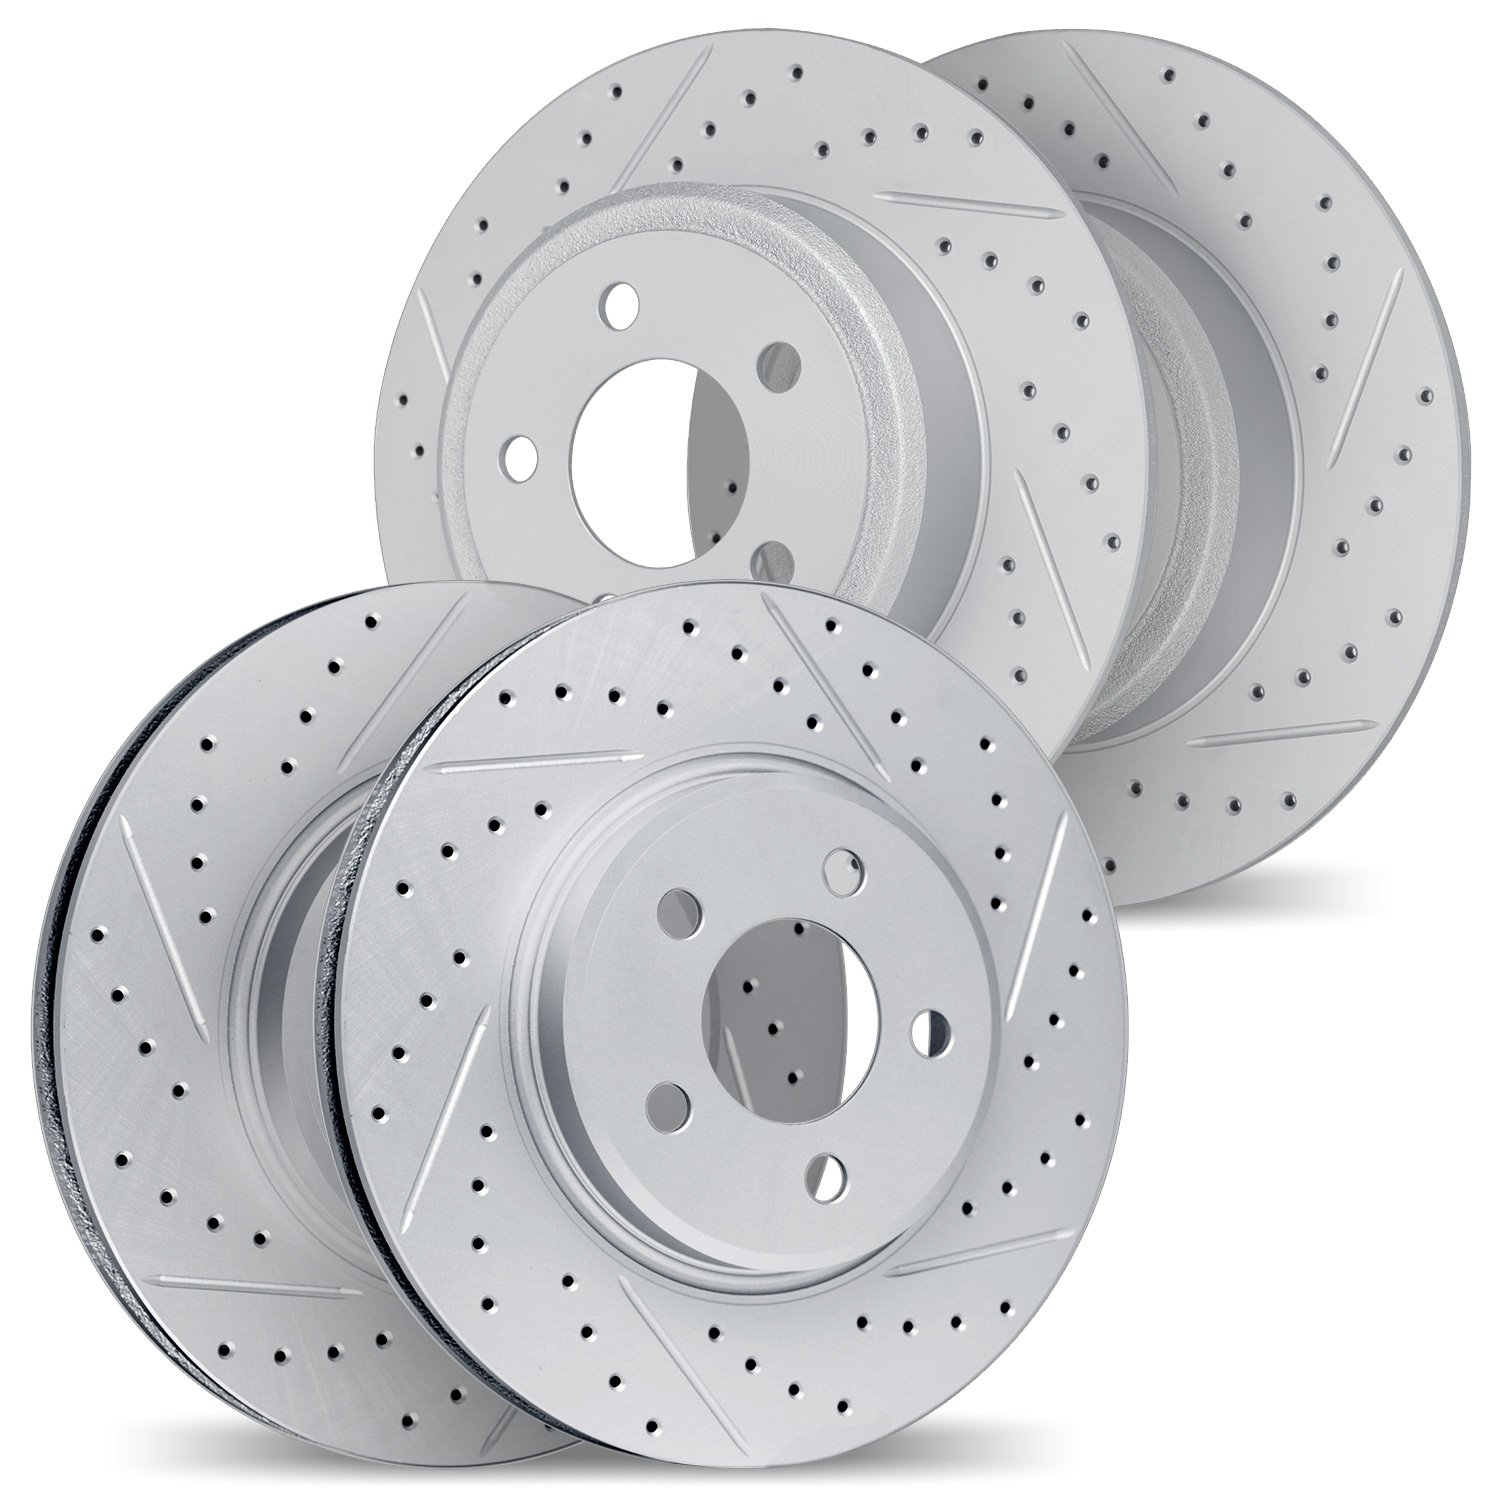 2004-40018 Geoperformance Drilled/Slotted Brake Rotors, 2008-2016 Multiple Makes/Models, Position: Front and Rear